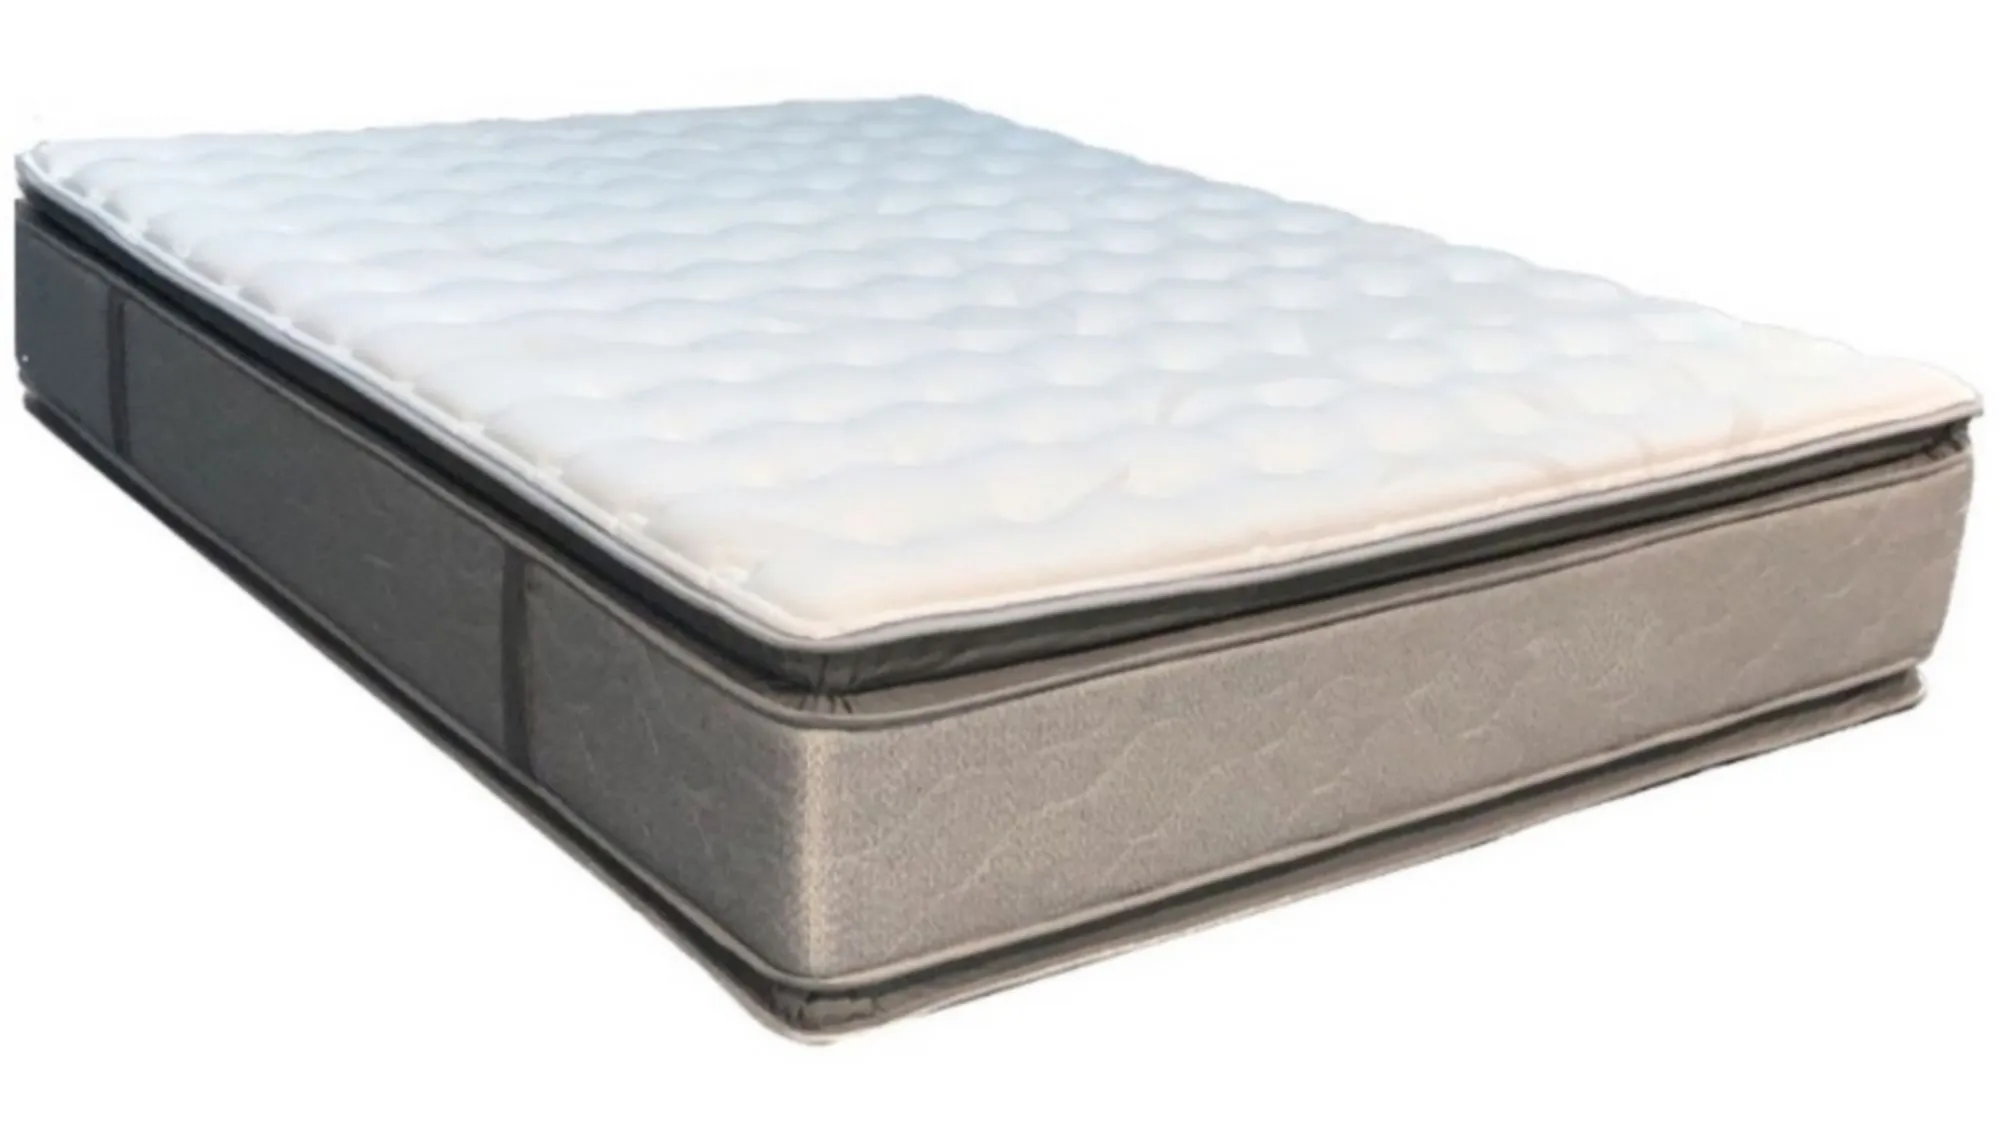 Magic Sleeper Double-Sided Pillow Top Hotel Mattress in Gray by Magic Sleeper